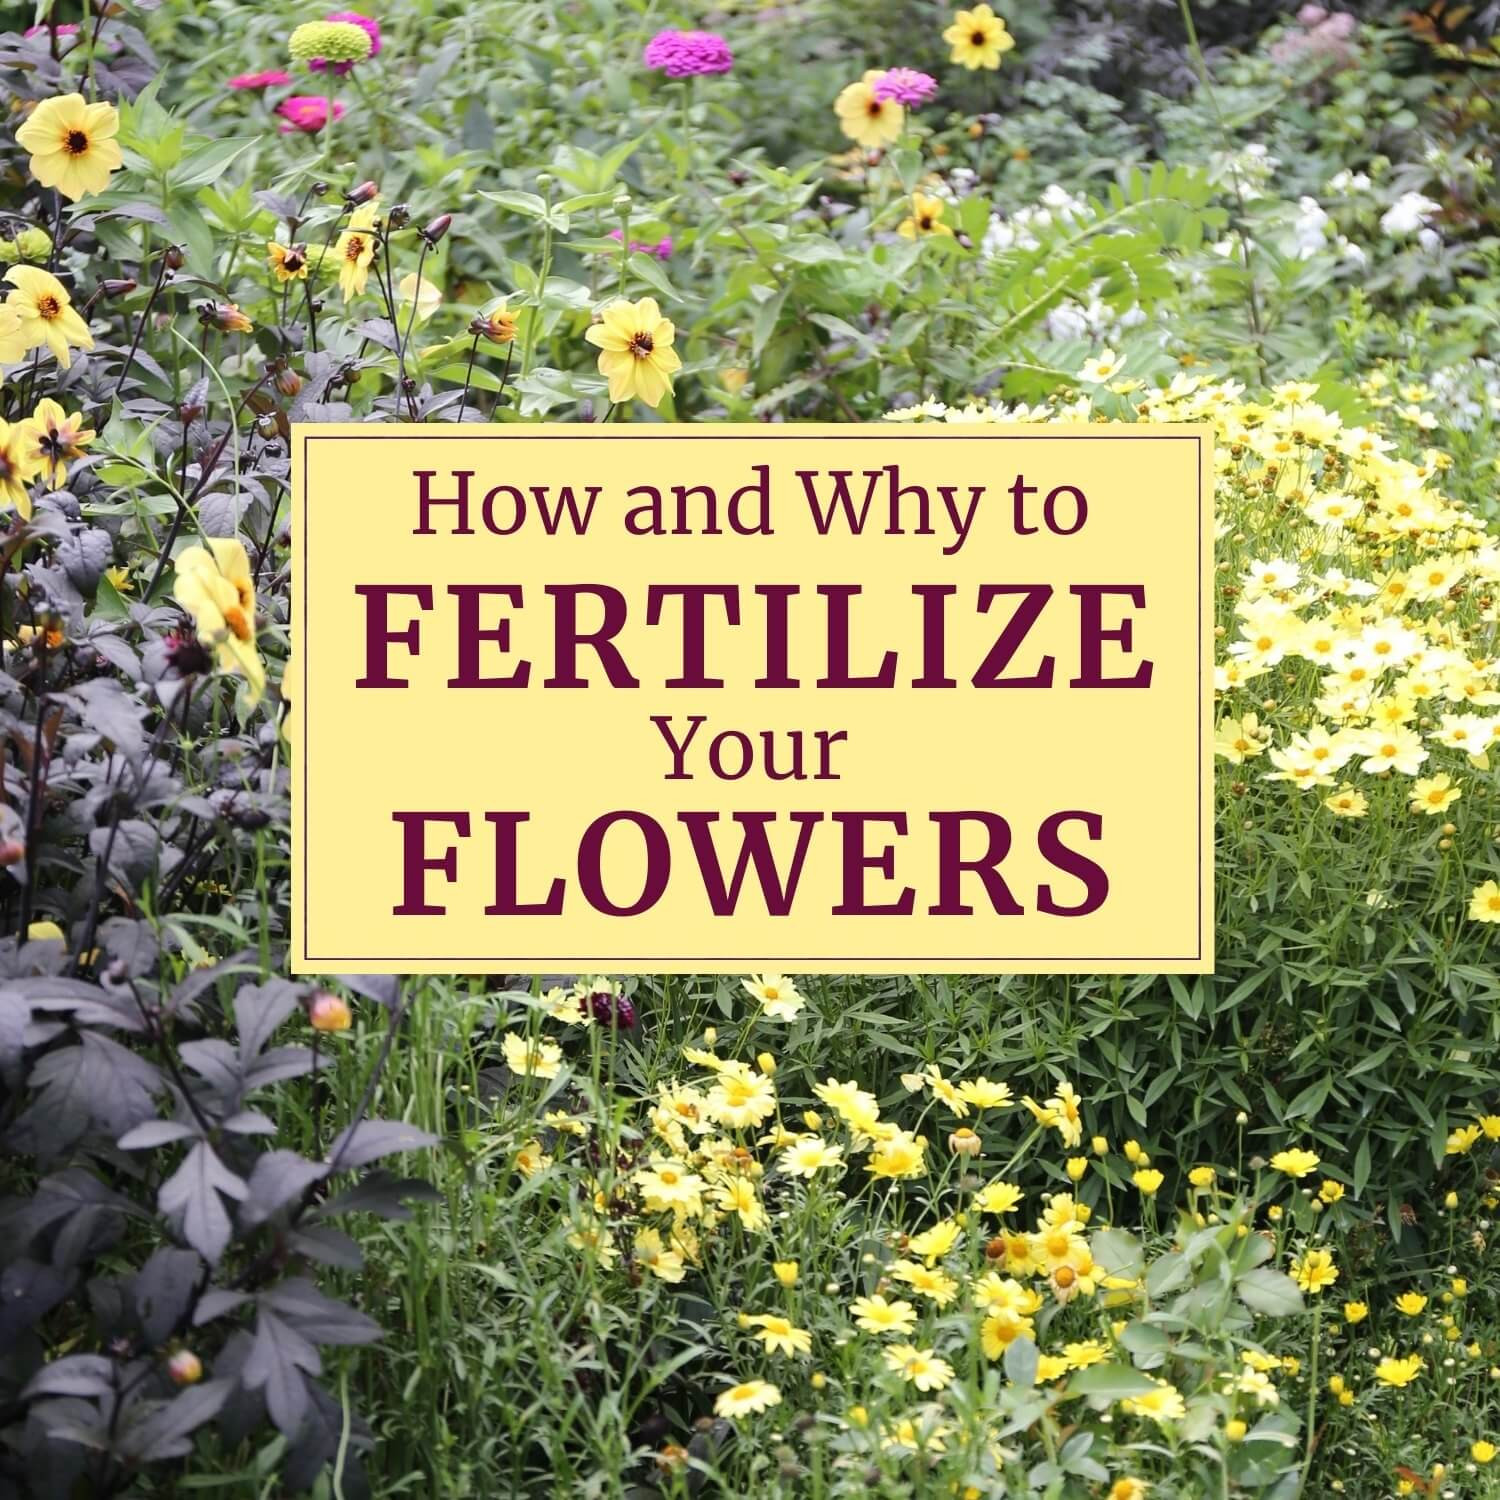 When and How Often to Fertilize Flower Gardens: A Complete Guide